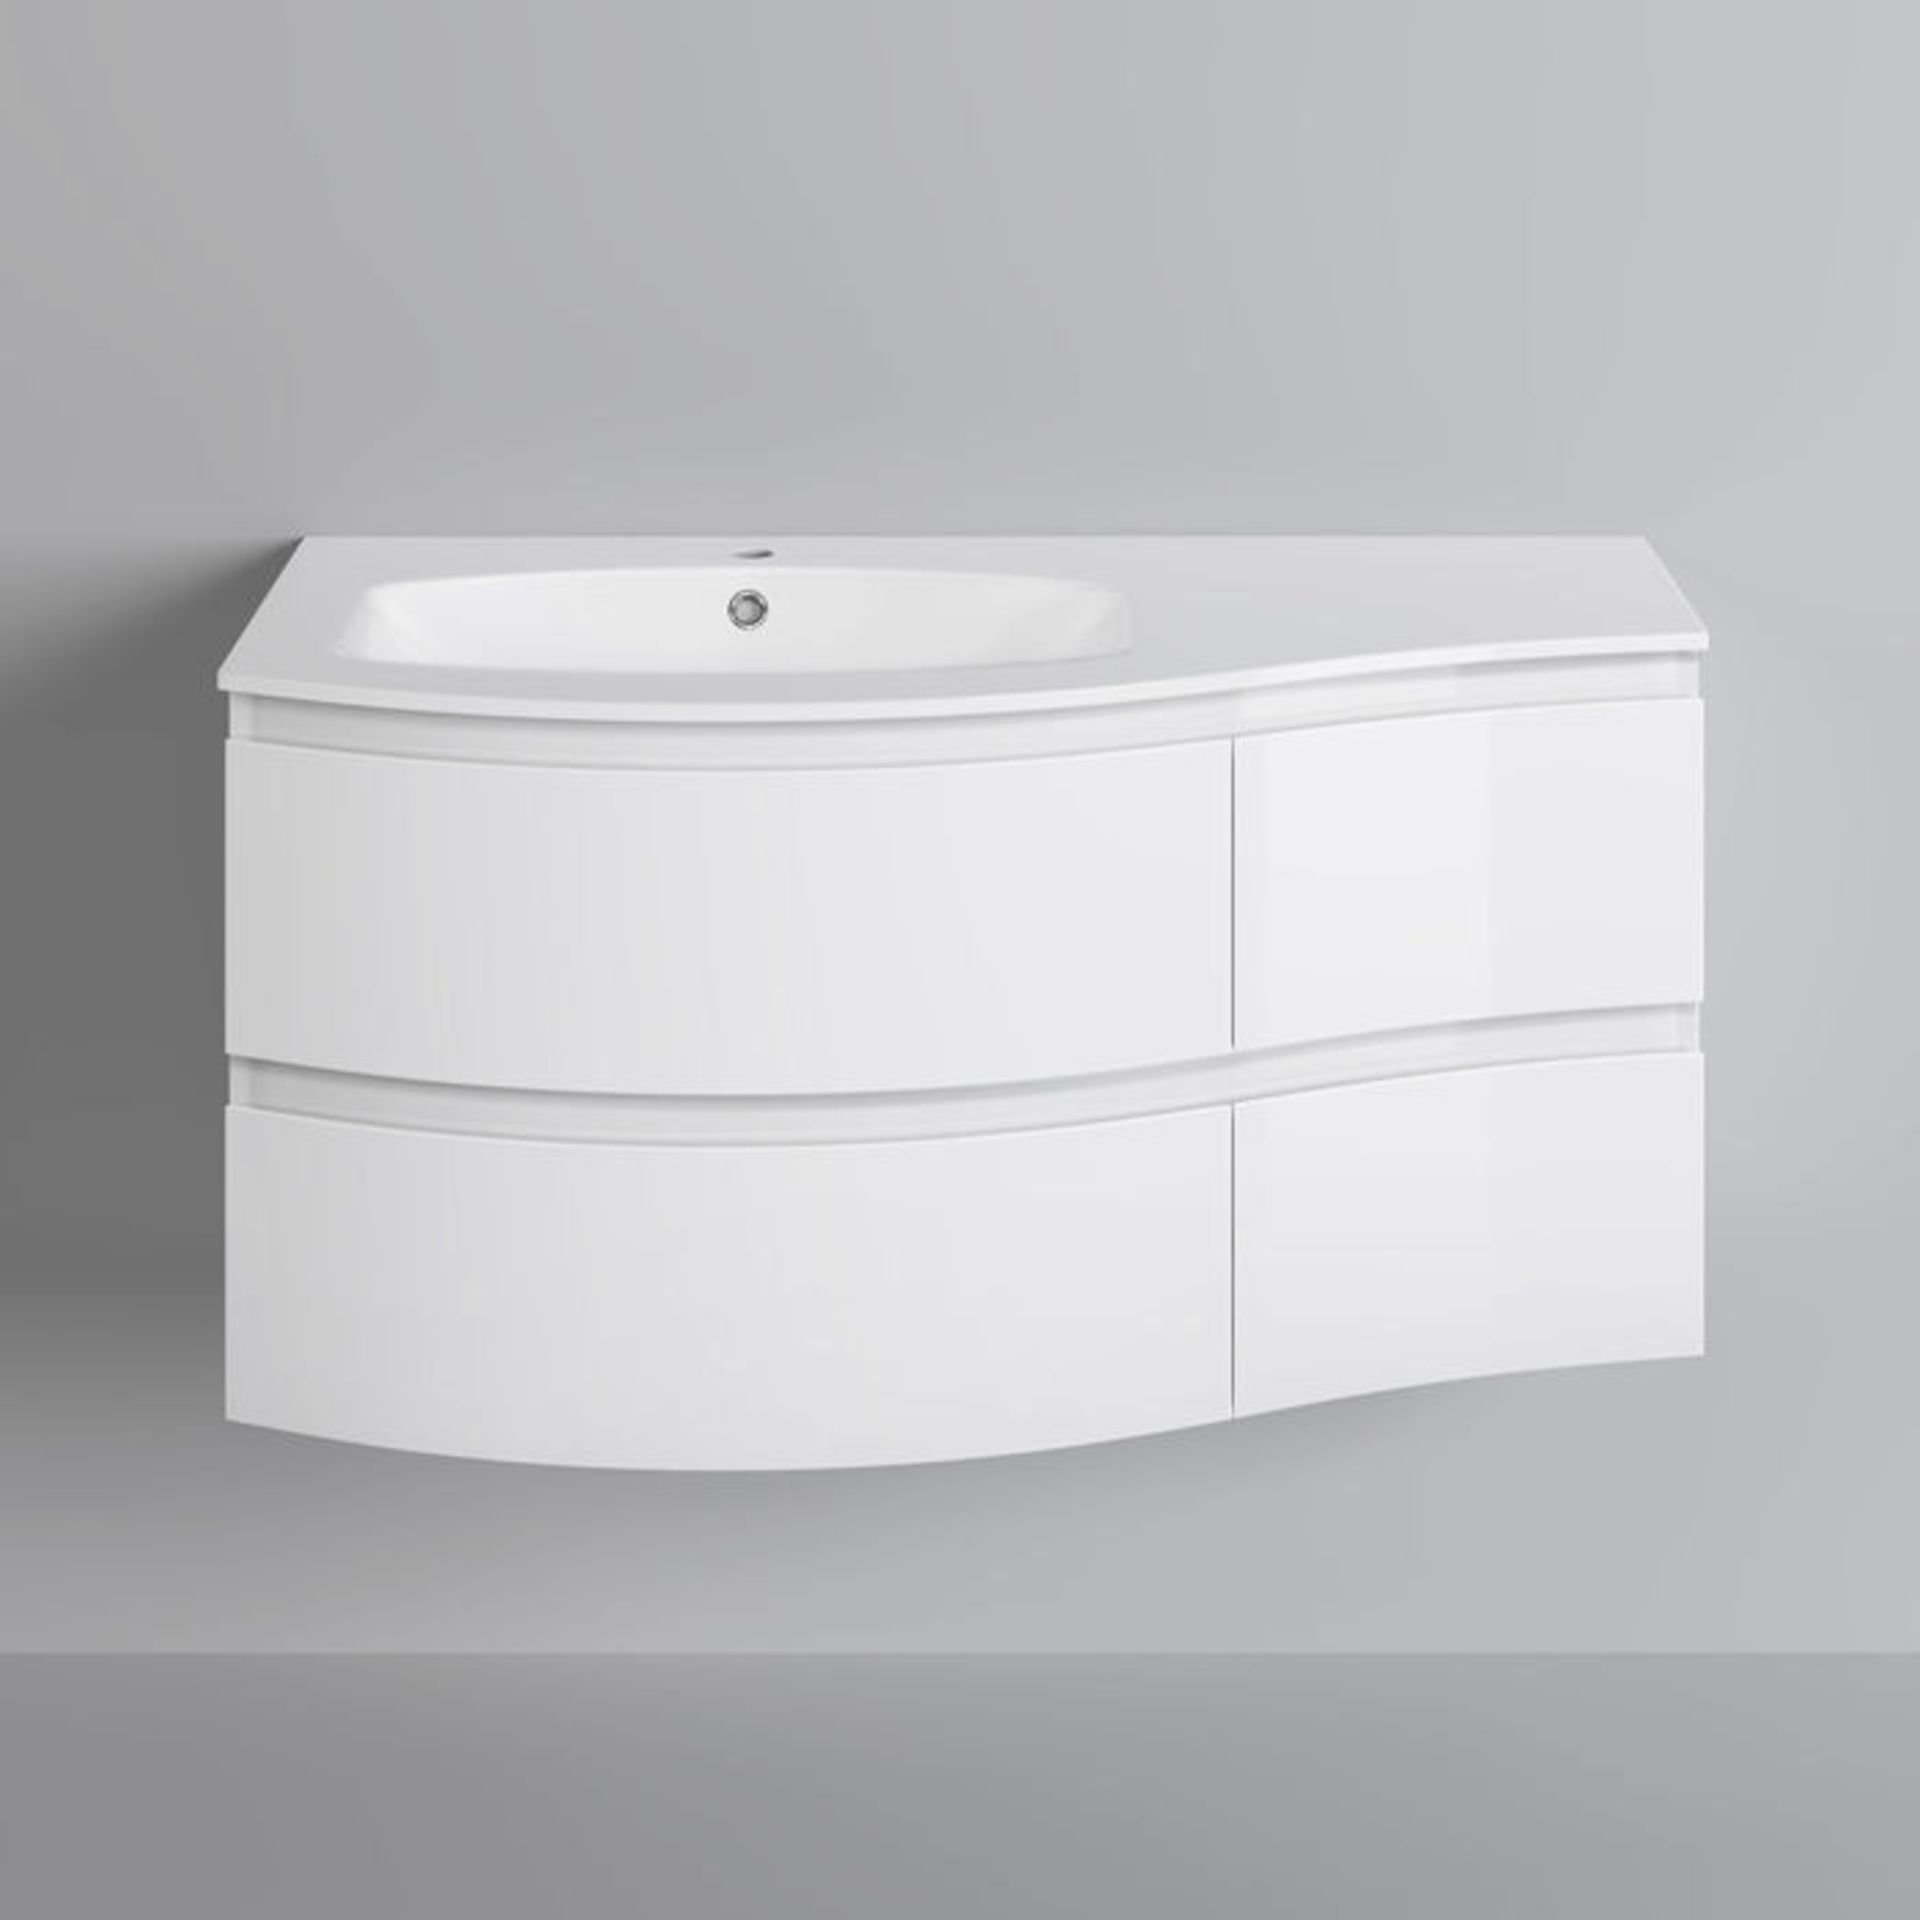 NEW & BOXED 1040mm Amelie High Gloss White Curved Vanity Unit - Left Hand - Wall Hung. RRP £1,... - Image 6 of 6